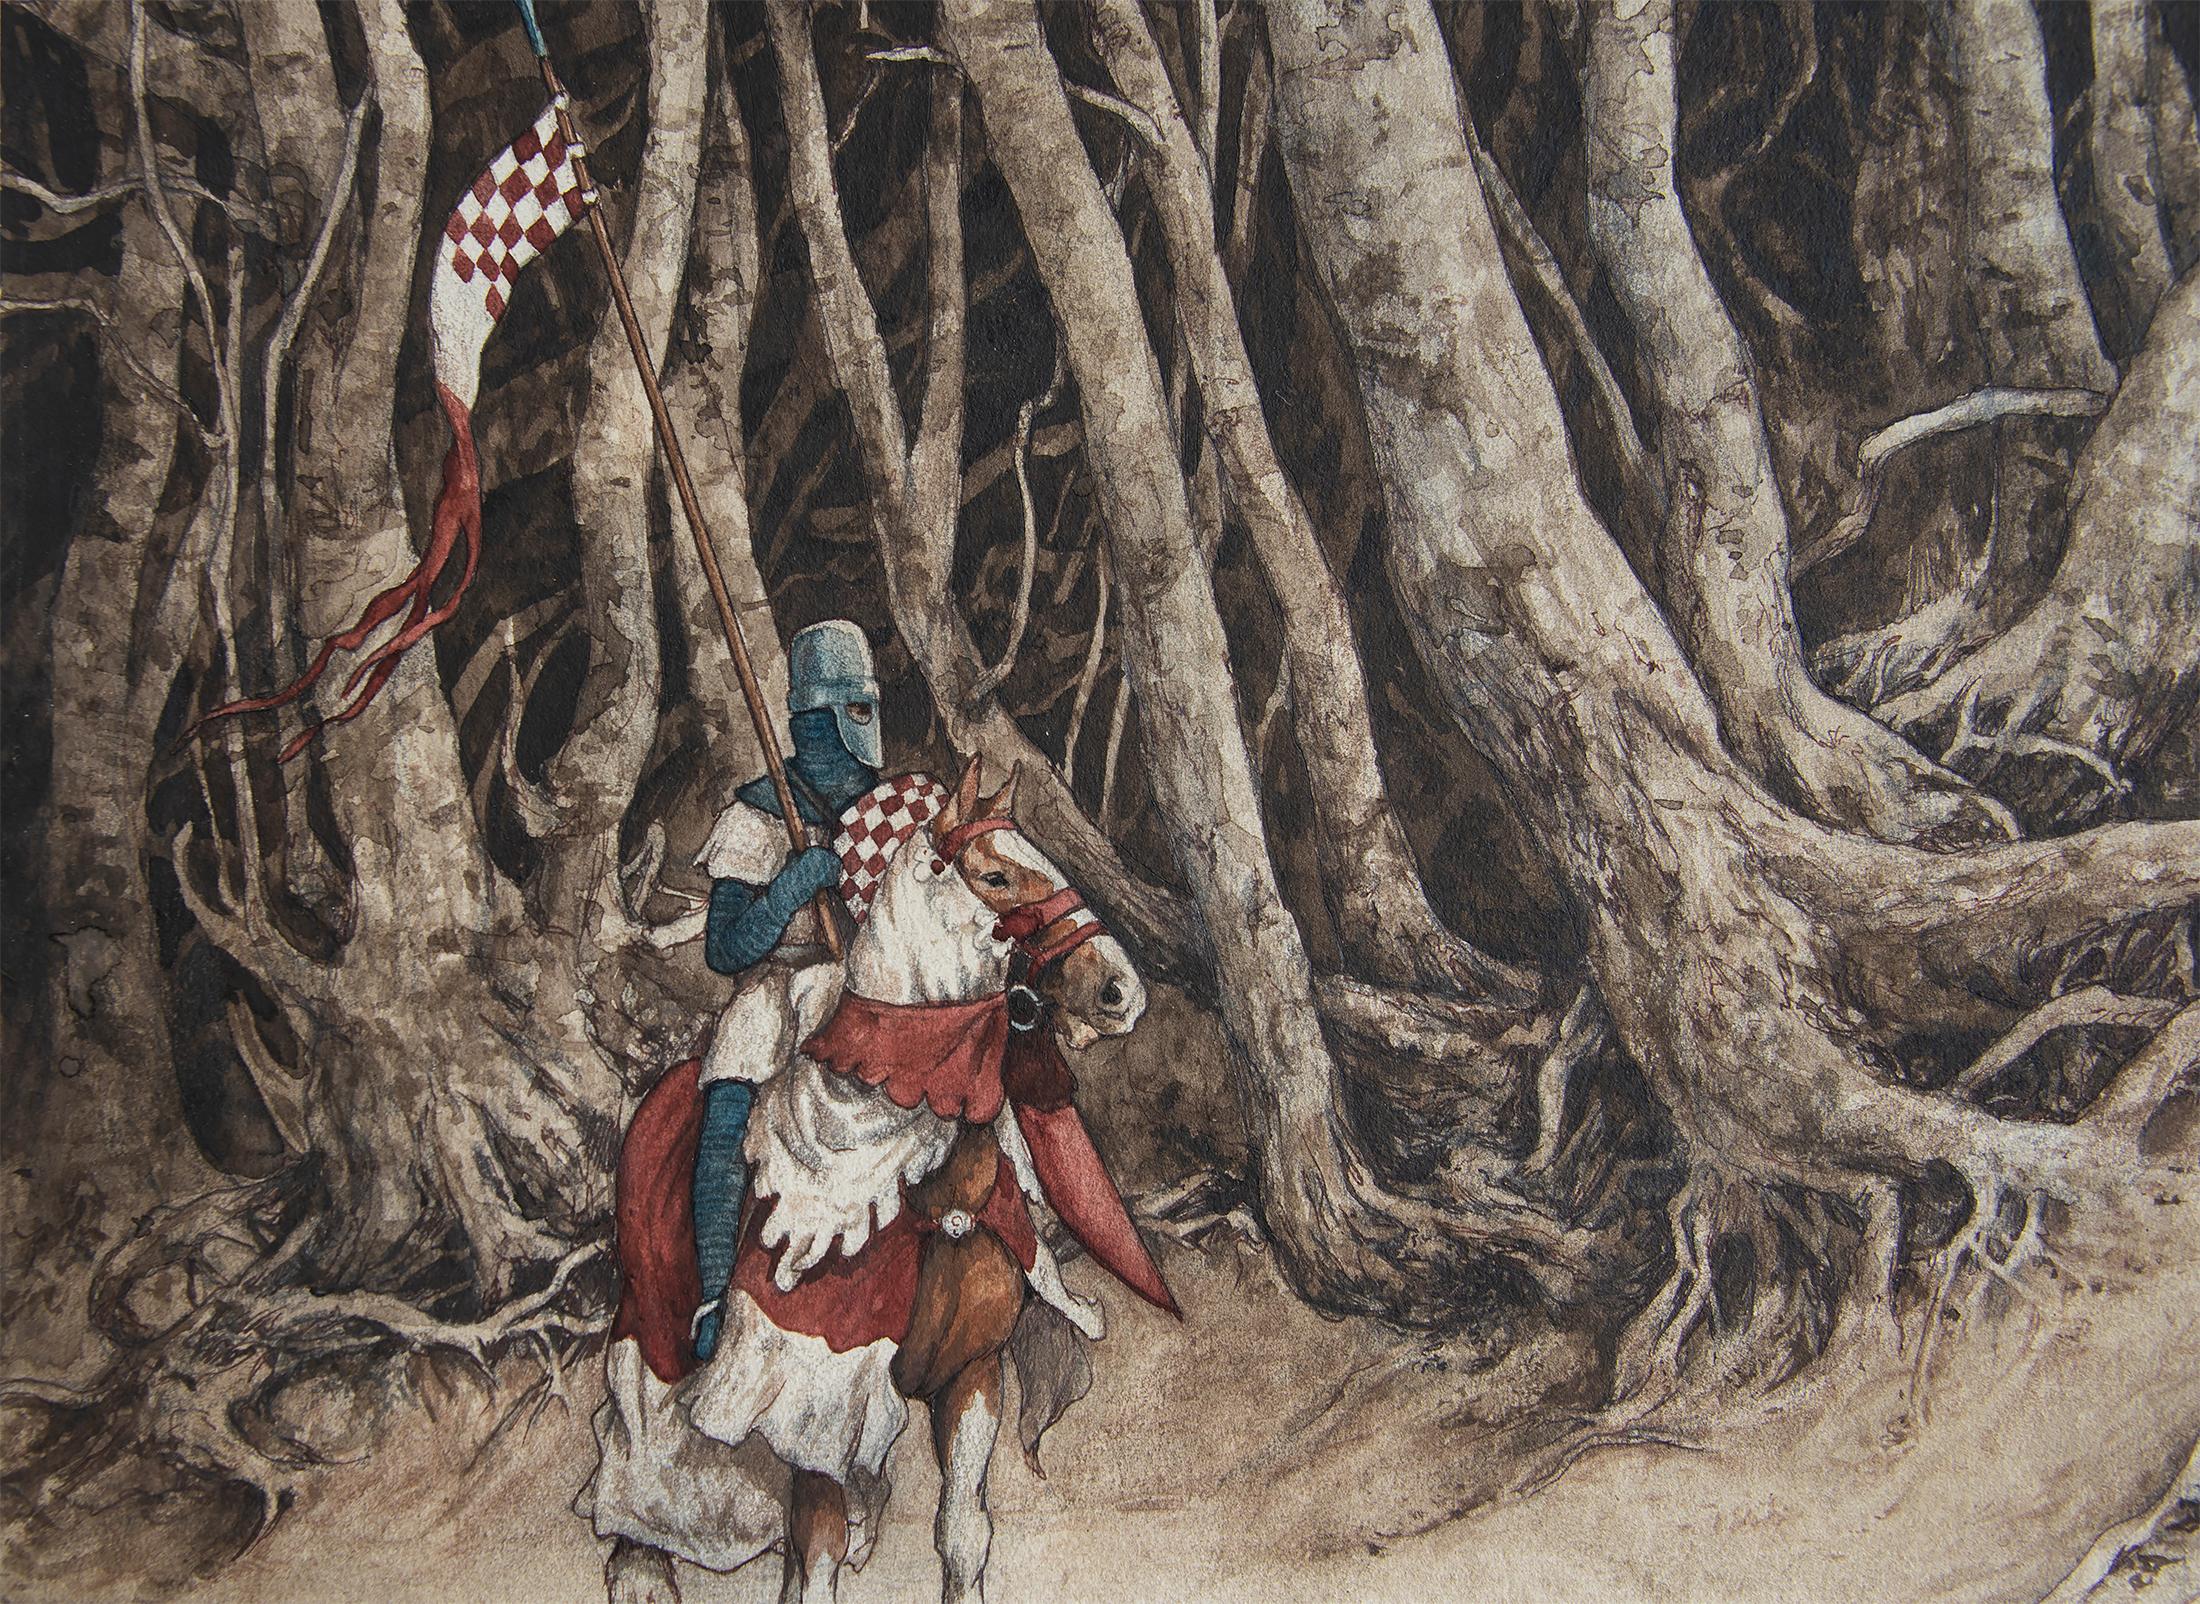 Goblin and Knight on White Horse Fantasy Illustration - Painting by Brian Froud